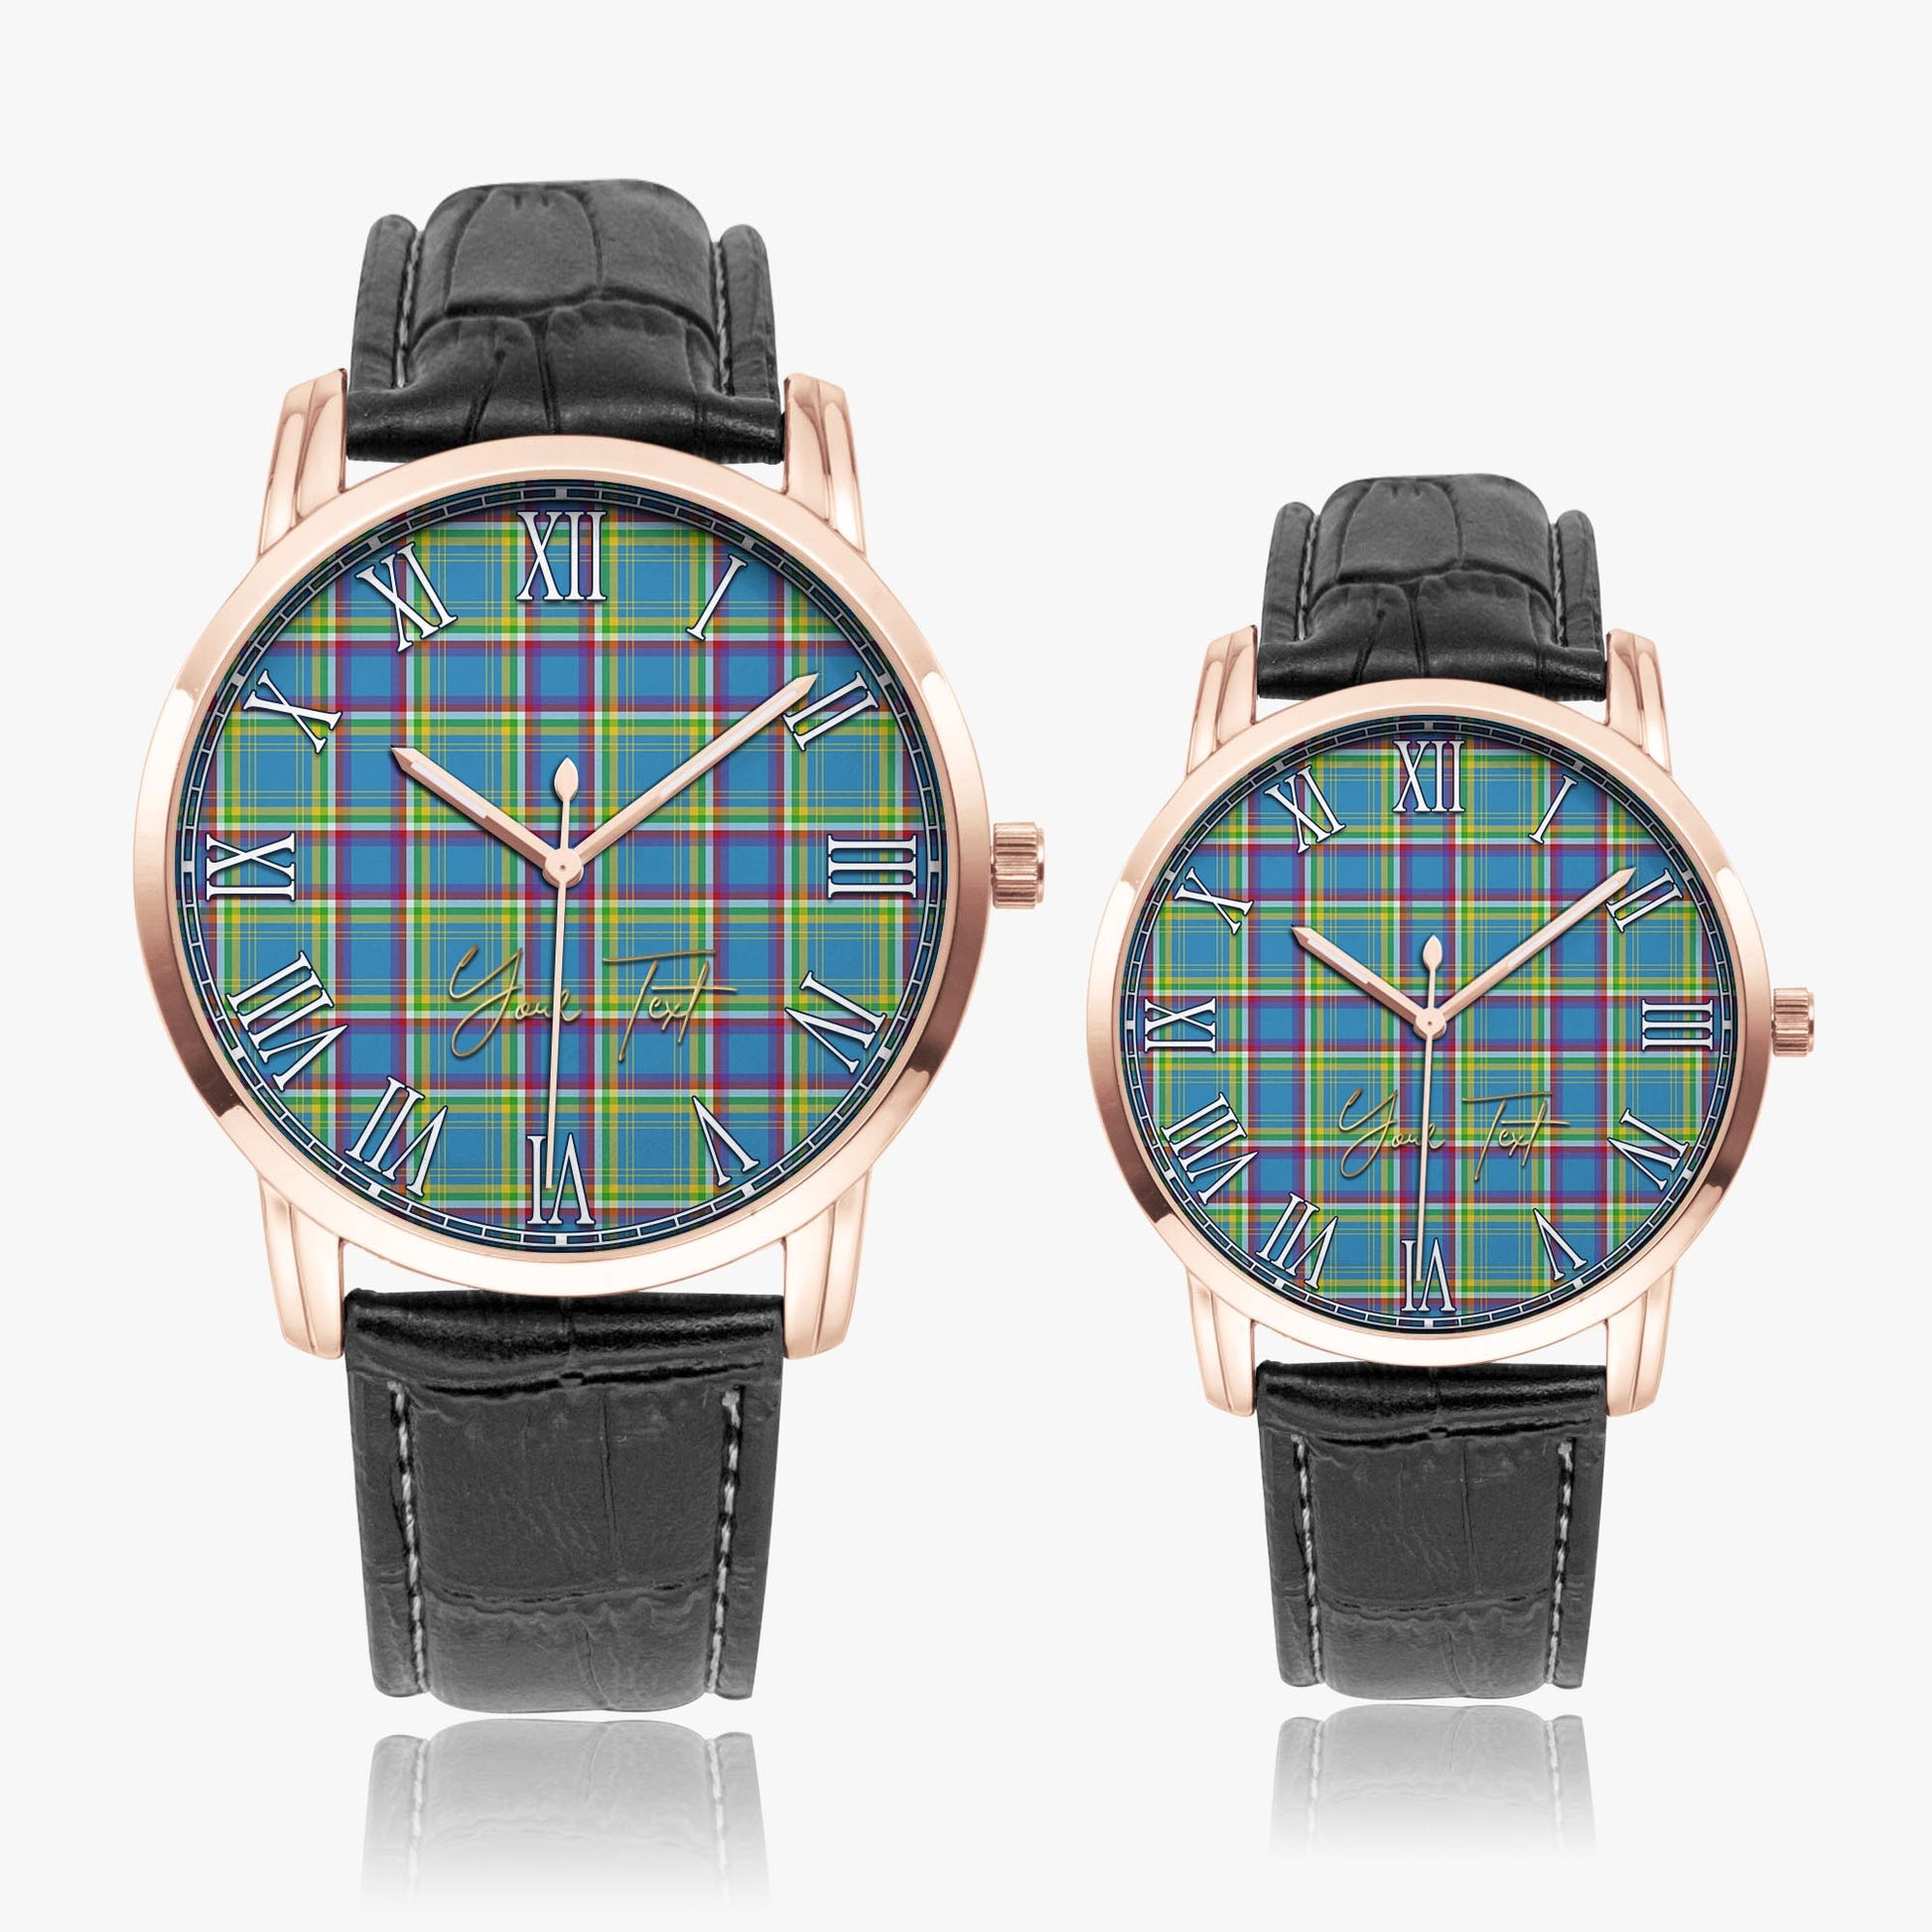 Yukon Territory Canada Tartan Personalized Your Text Leather Trap Quartz Watch Wide Type Rose Gold Case With Black Leather Strap - Tartanvibesclothing Shop